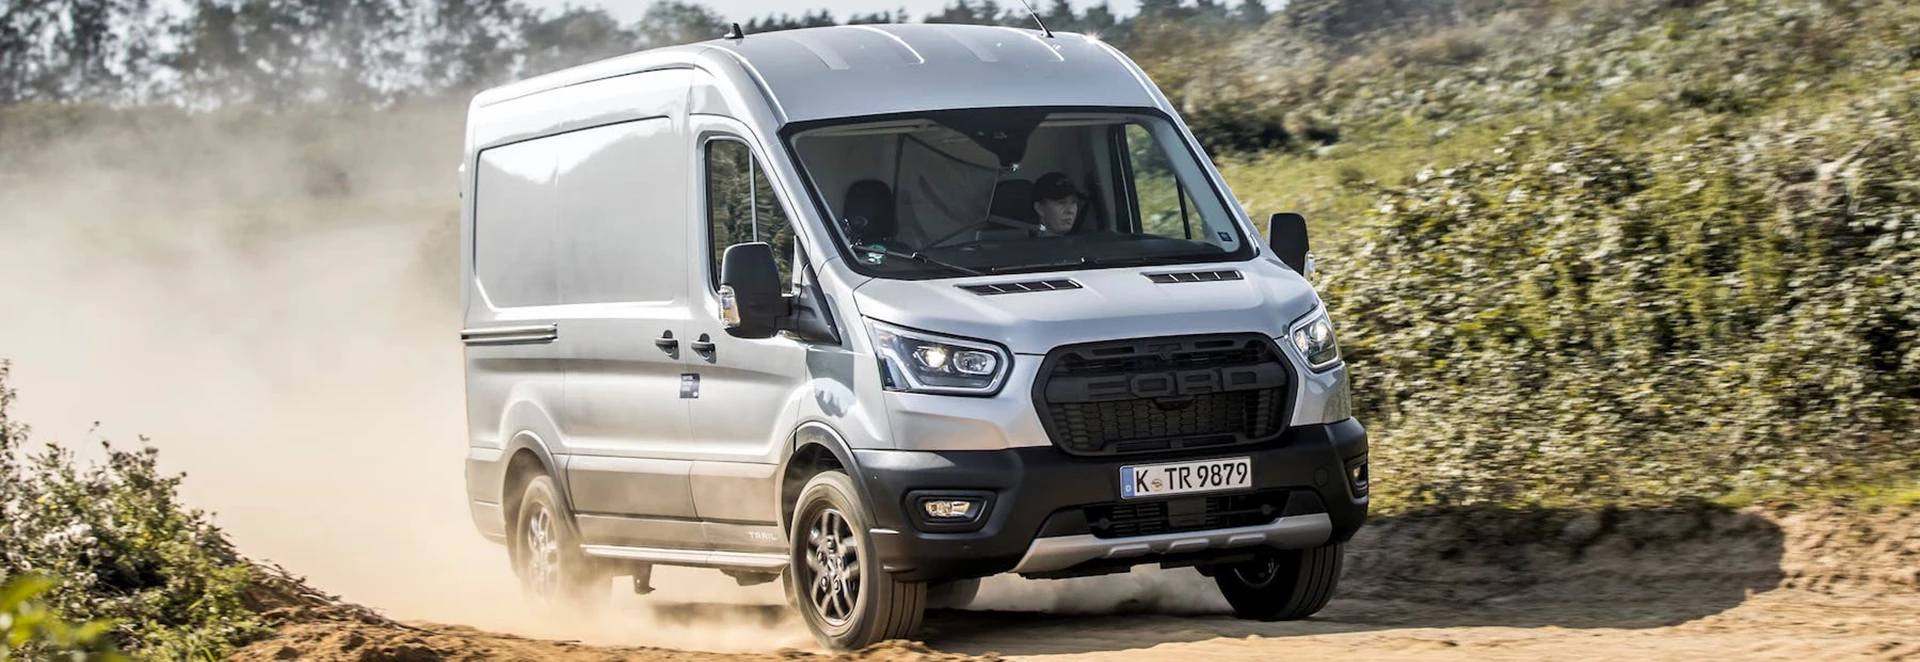 2021 Ford Transit Trail review 